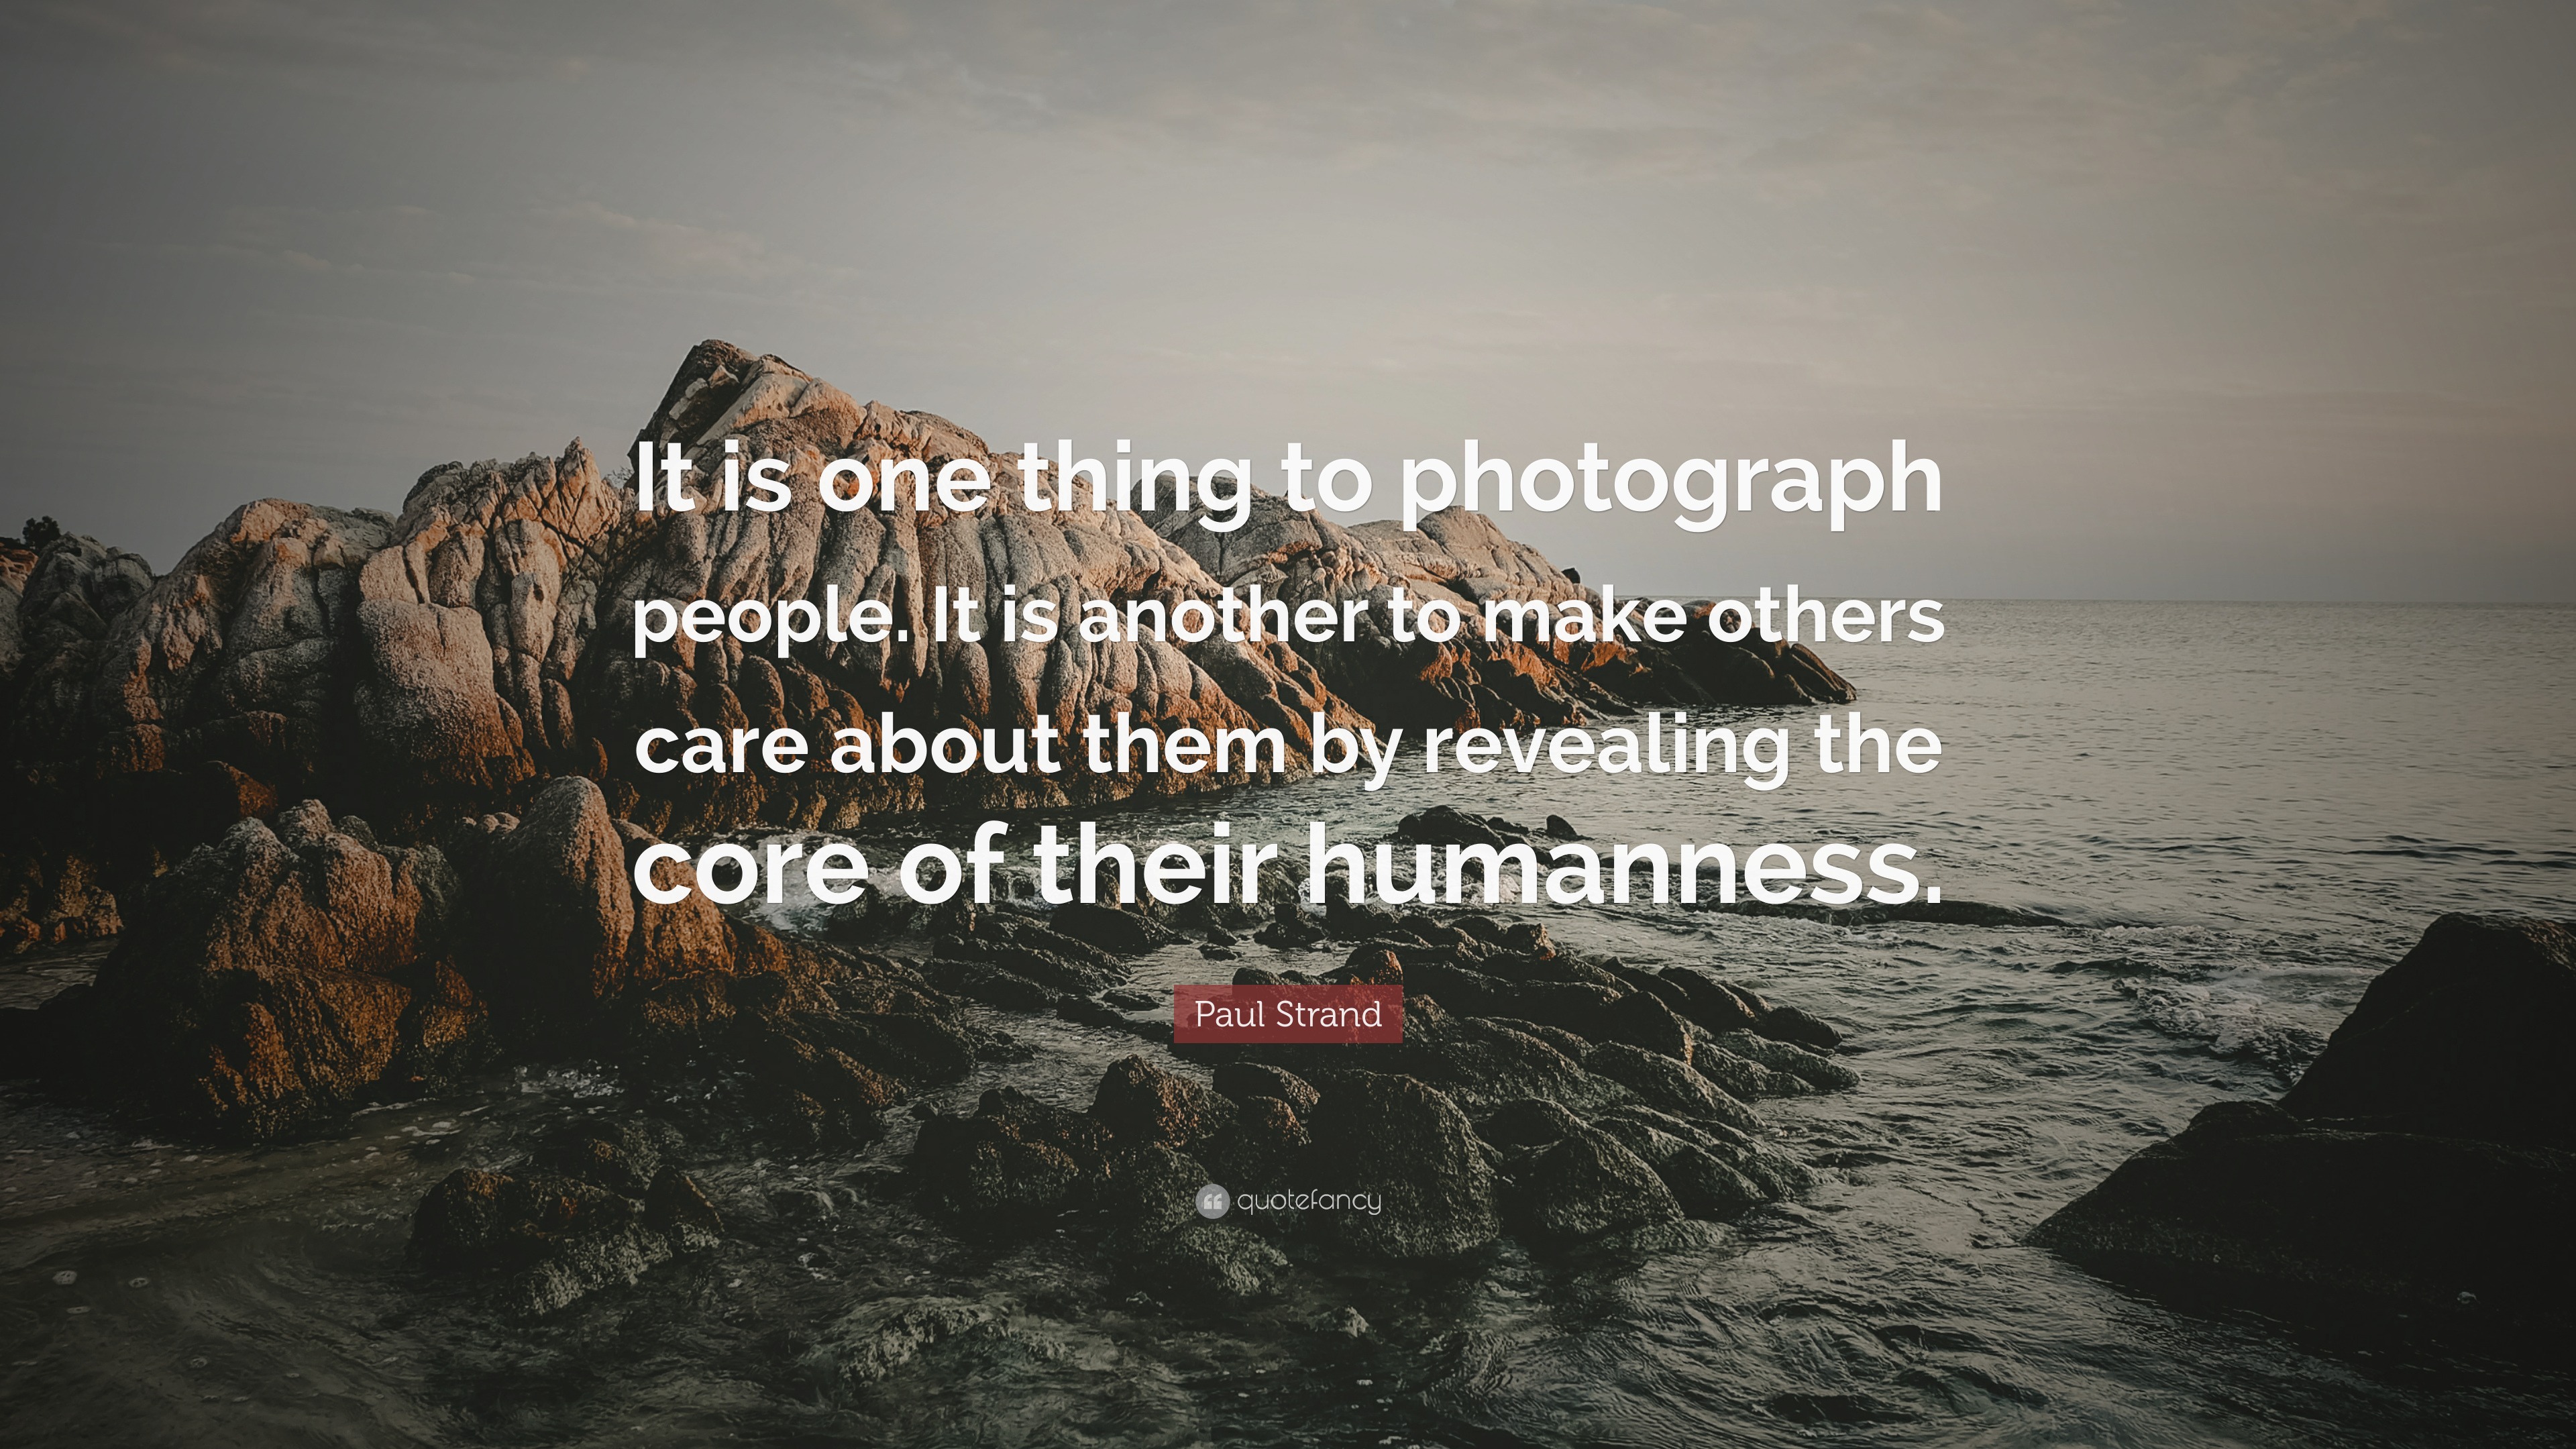 Paul Strand Quotes (20 wallpapers) - Quotefancy